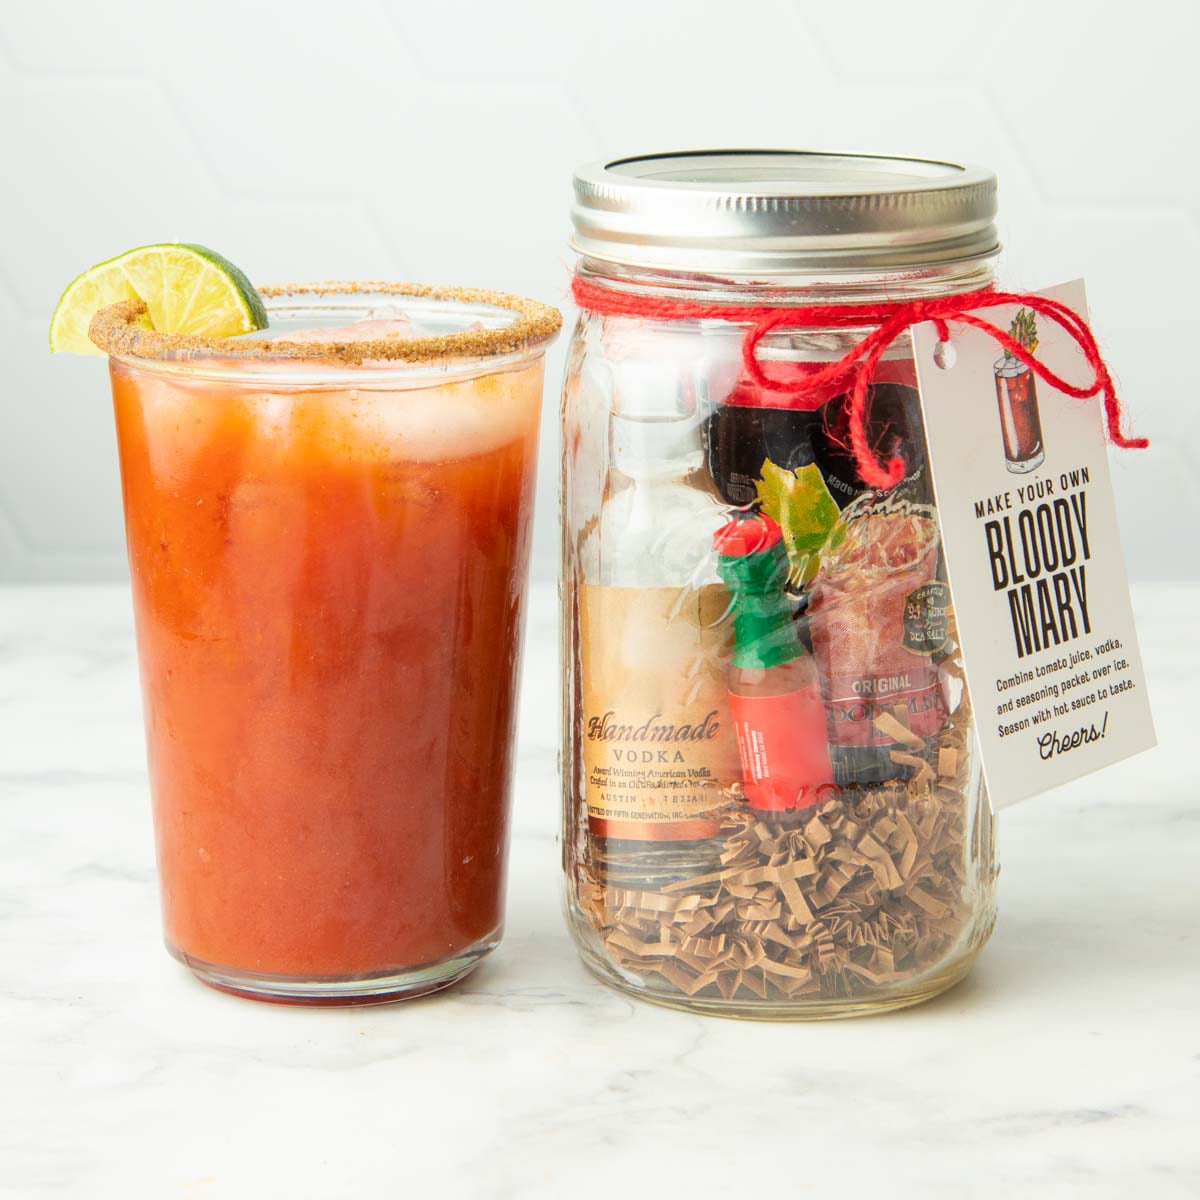 A bloody mary stands next to a diy bloody mary cocktail kit in a mason jar.